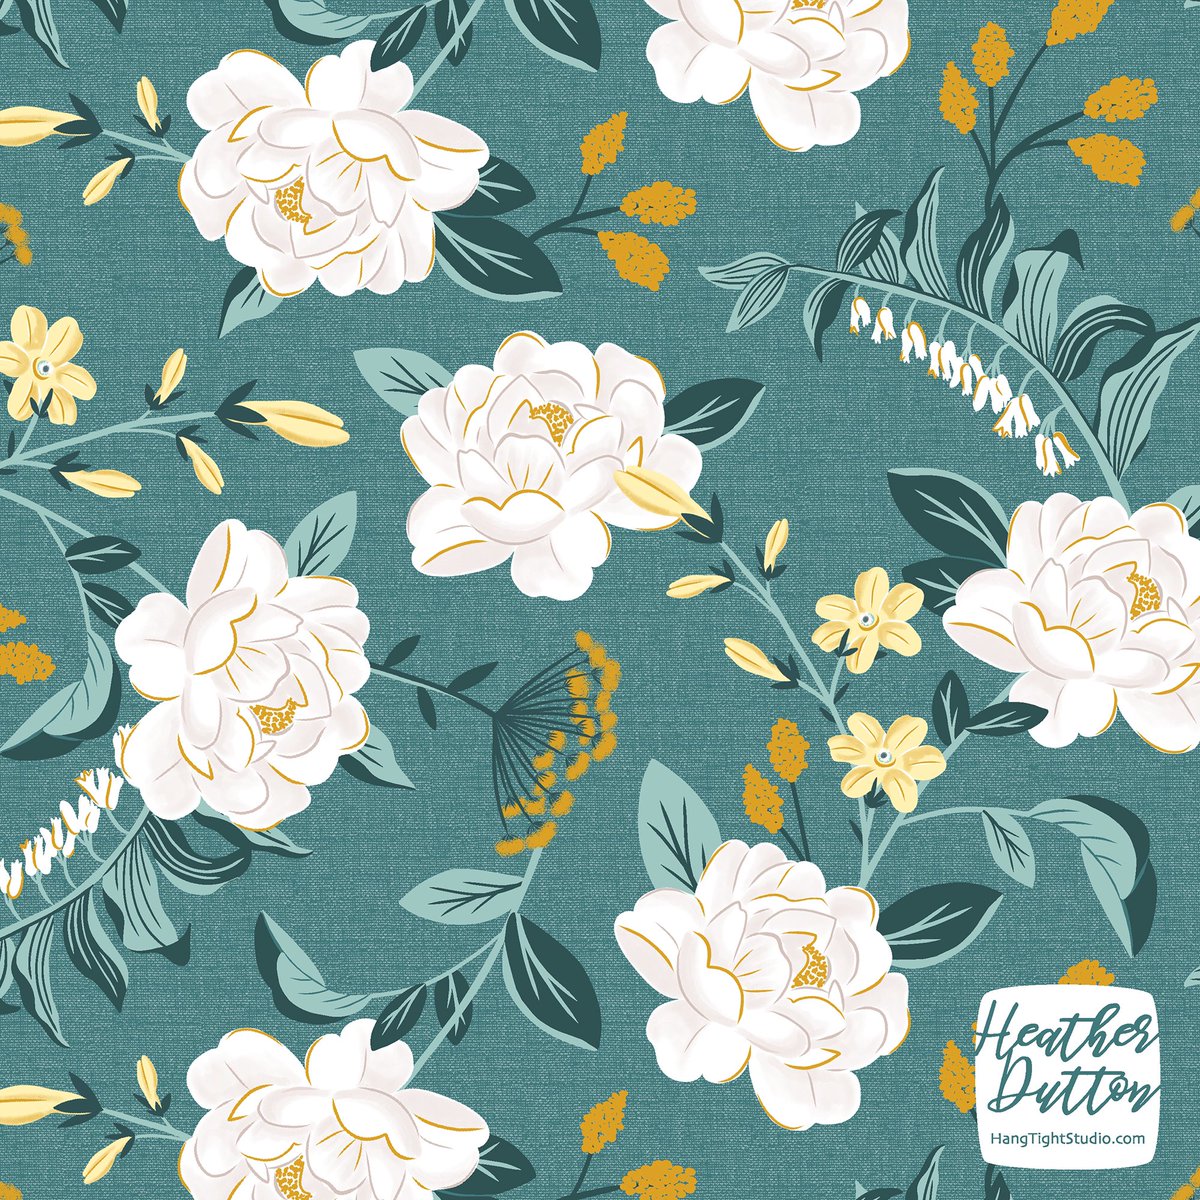 There’s something about drawing floral prints that totally takes me to my happy place 😊 bit.ly/3TAYe9v

#artlicensing #surfacedesign #spoonflower #shopsmall #patterndesigner #patternlove #patterndesign #surfacedesign